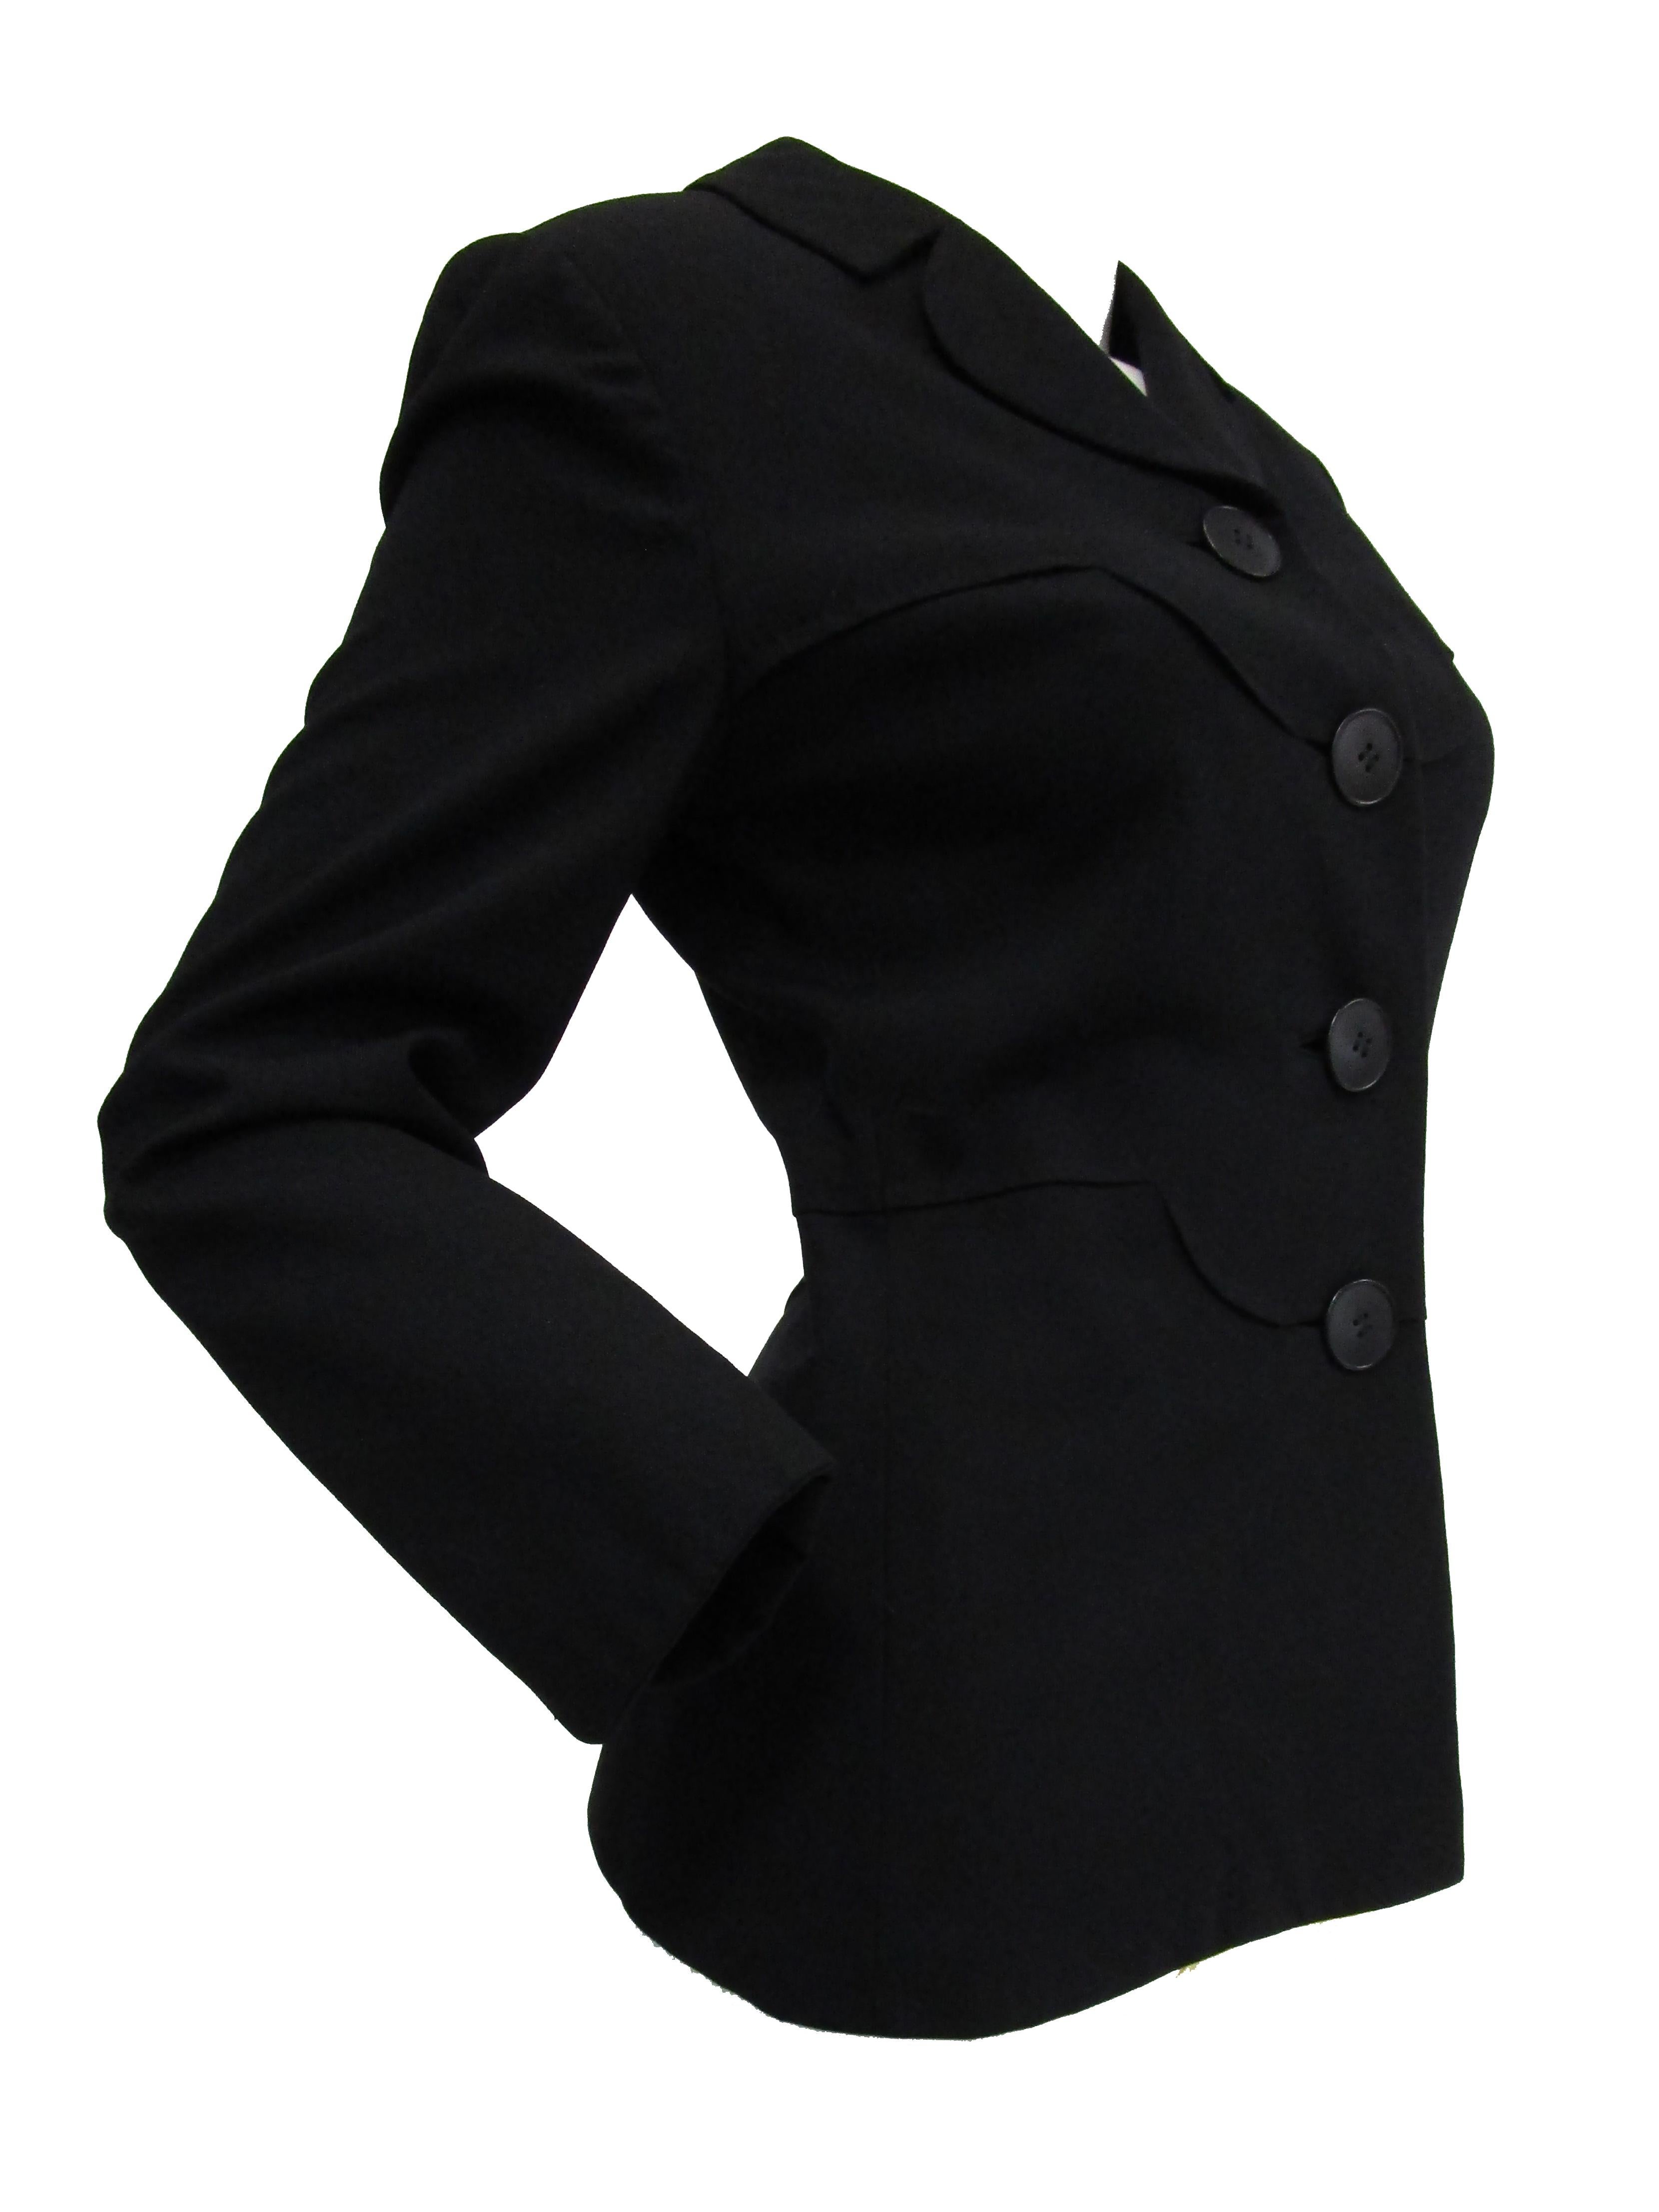 Incredible black wool blazer by Irene Lentz (also known as Irene Gibbons). The jacket is hip length, with long sleeves, a fitted silhouette, structured shoulders, and a high V - neck closure with a small, rounded, notched lapel. Four round oversized